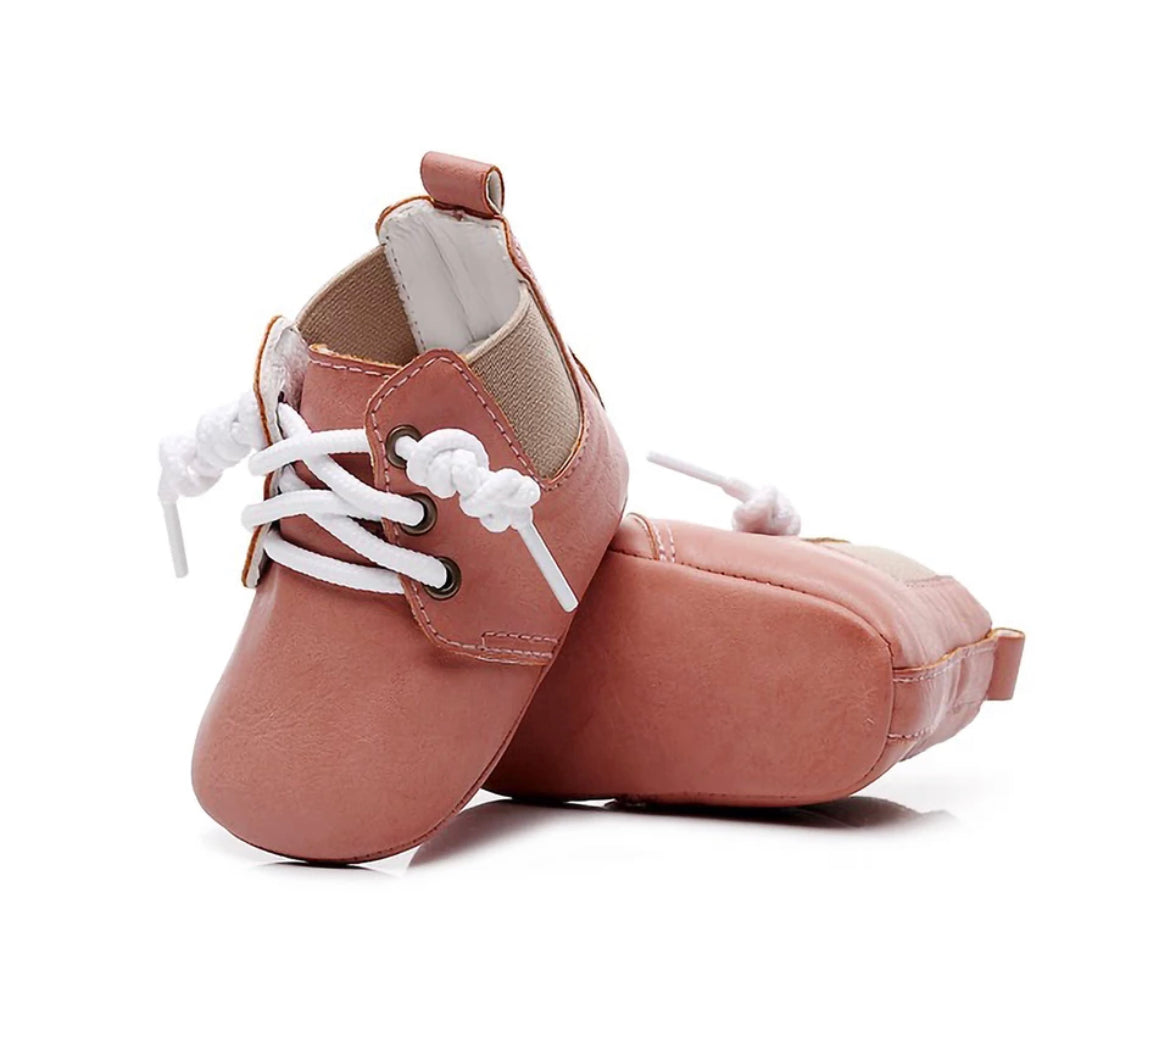 Leather look baby boots - Pink.